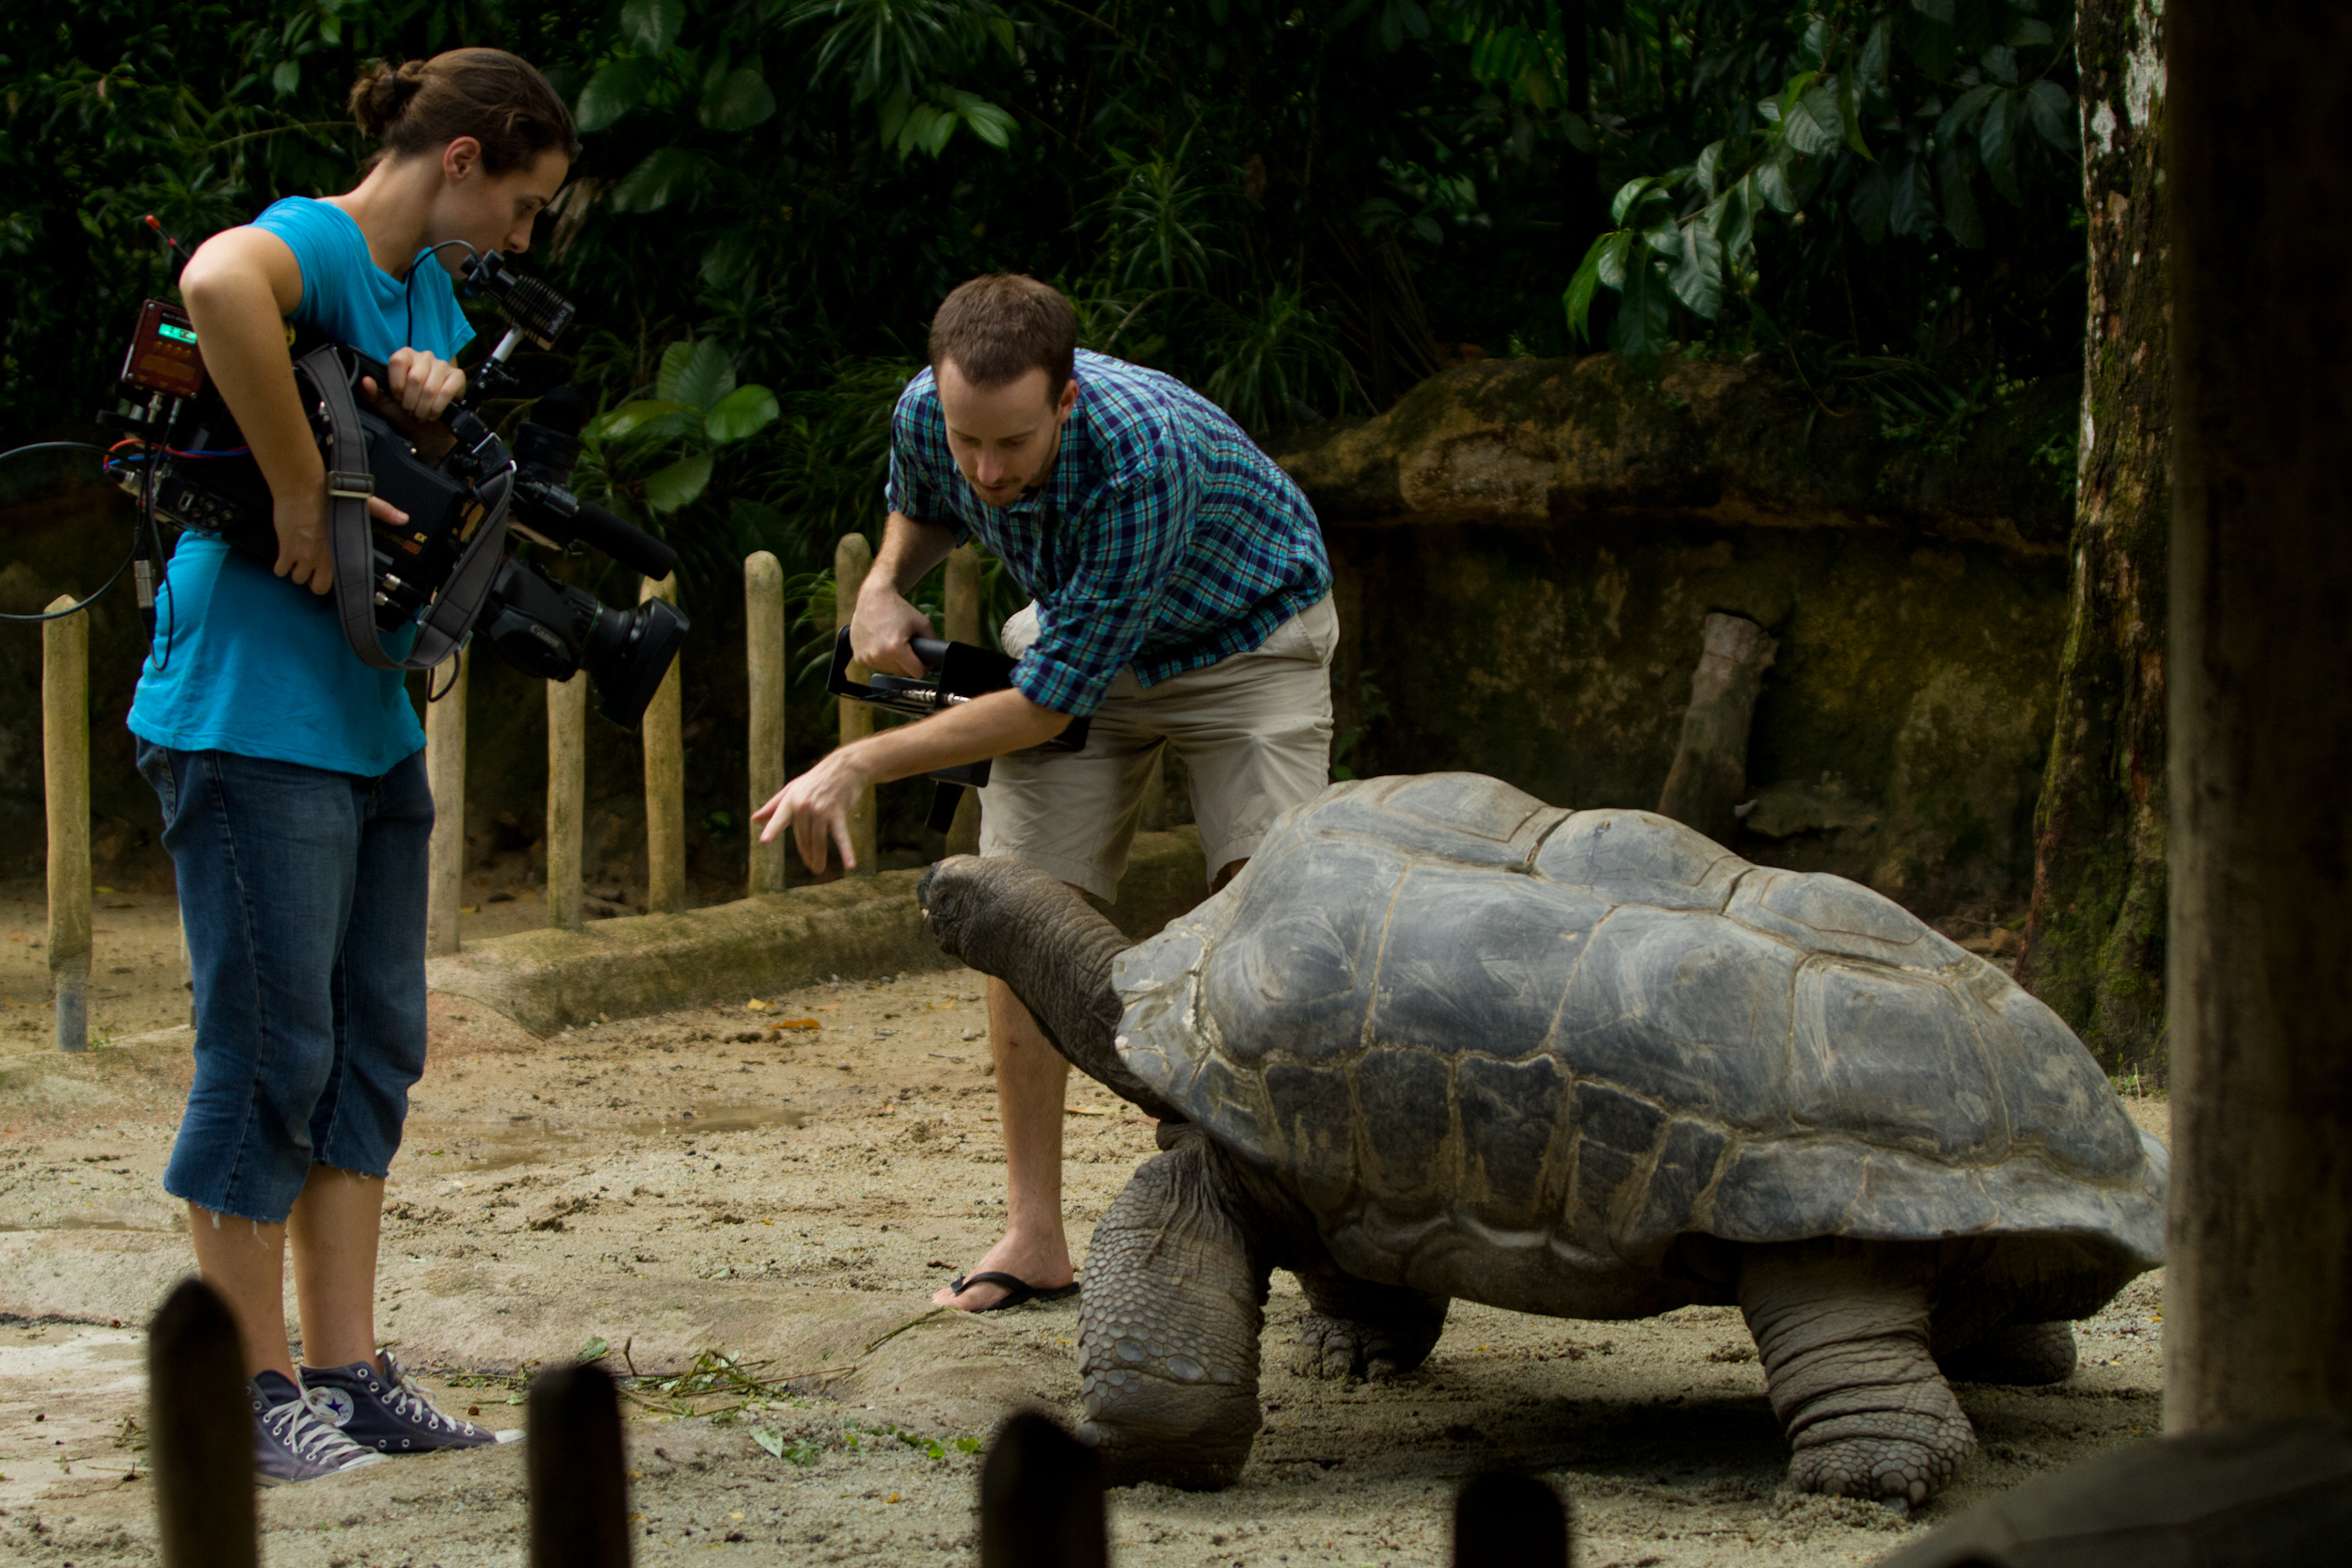 giving direction to a giant tortoise in singapore